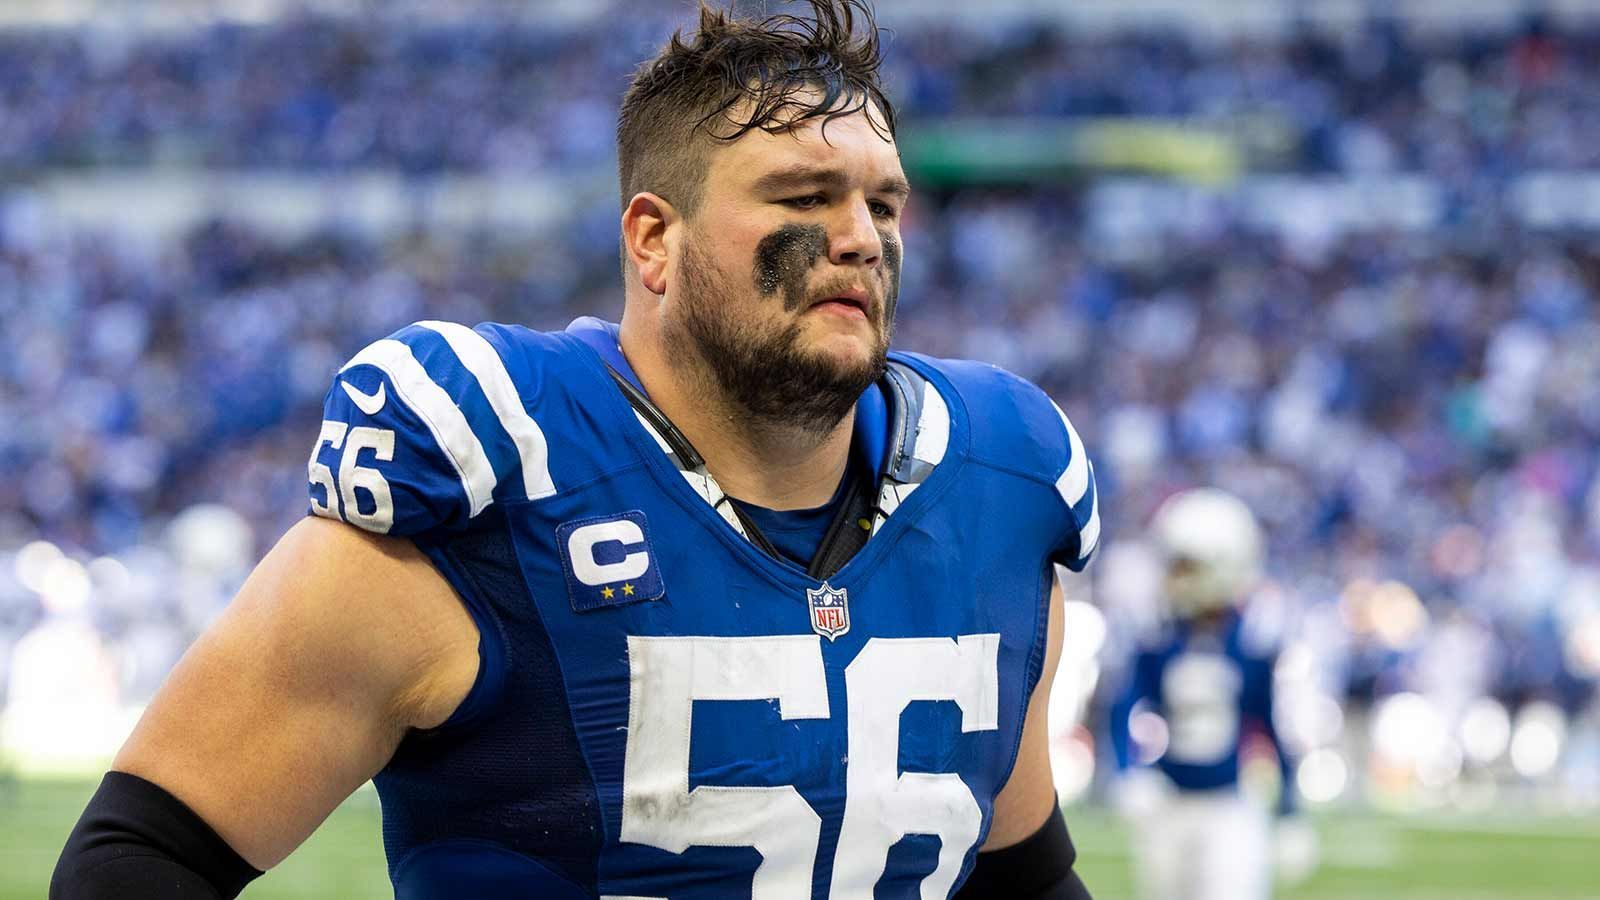 <strong>Platz 28 (geteilt): Indianapolis Colts - 4</strong><br>Quenton Nelson (2018) - 6 Pro Bowls<br>Ryan Kelly (2016) - 4 Pro Bowls<br>Shaquille Leonard (2018) - 3 Pro Bowls<br>Jonathan Taylor (2020) - 1 Pro Bowl
